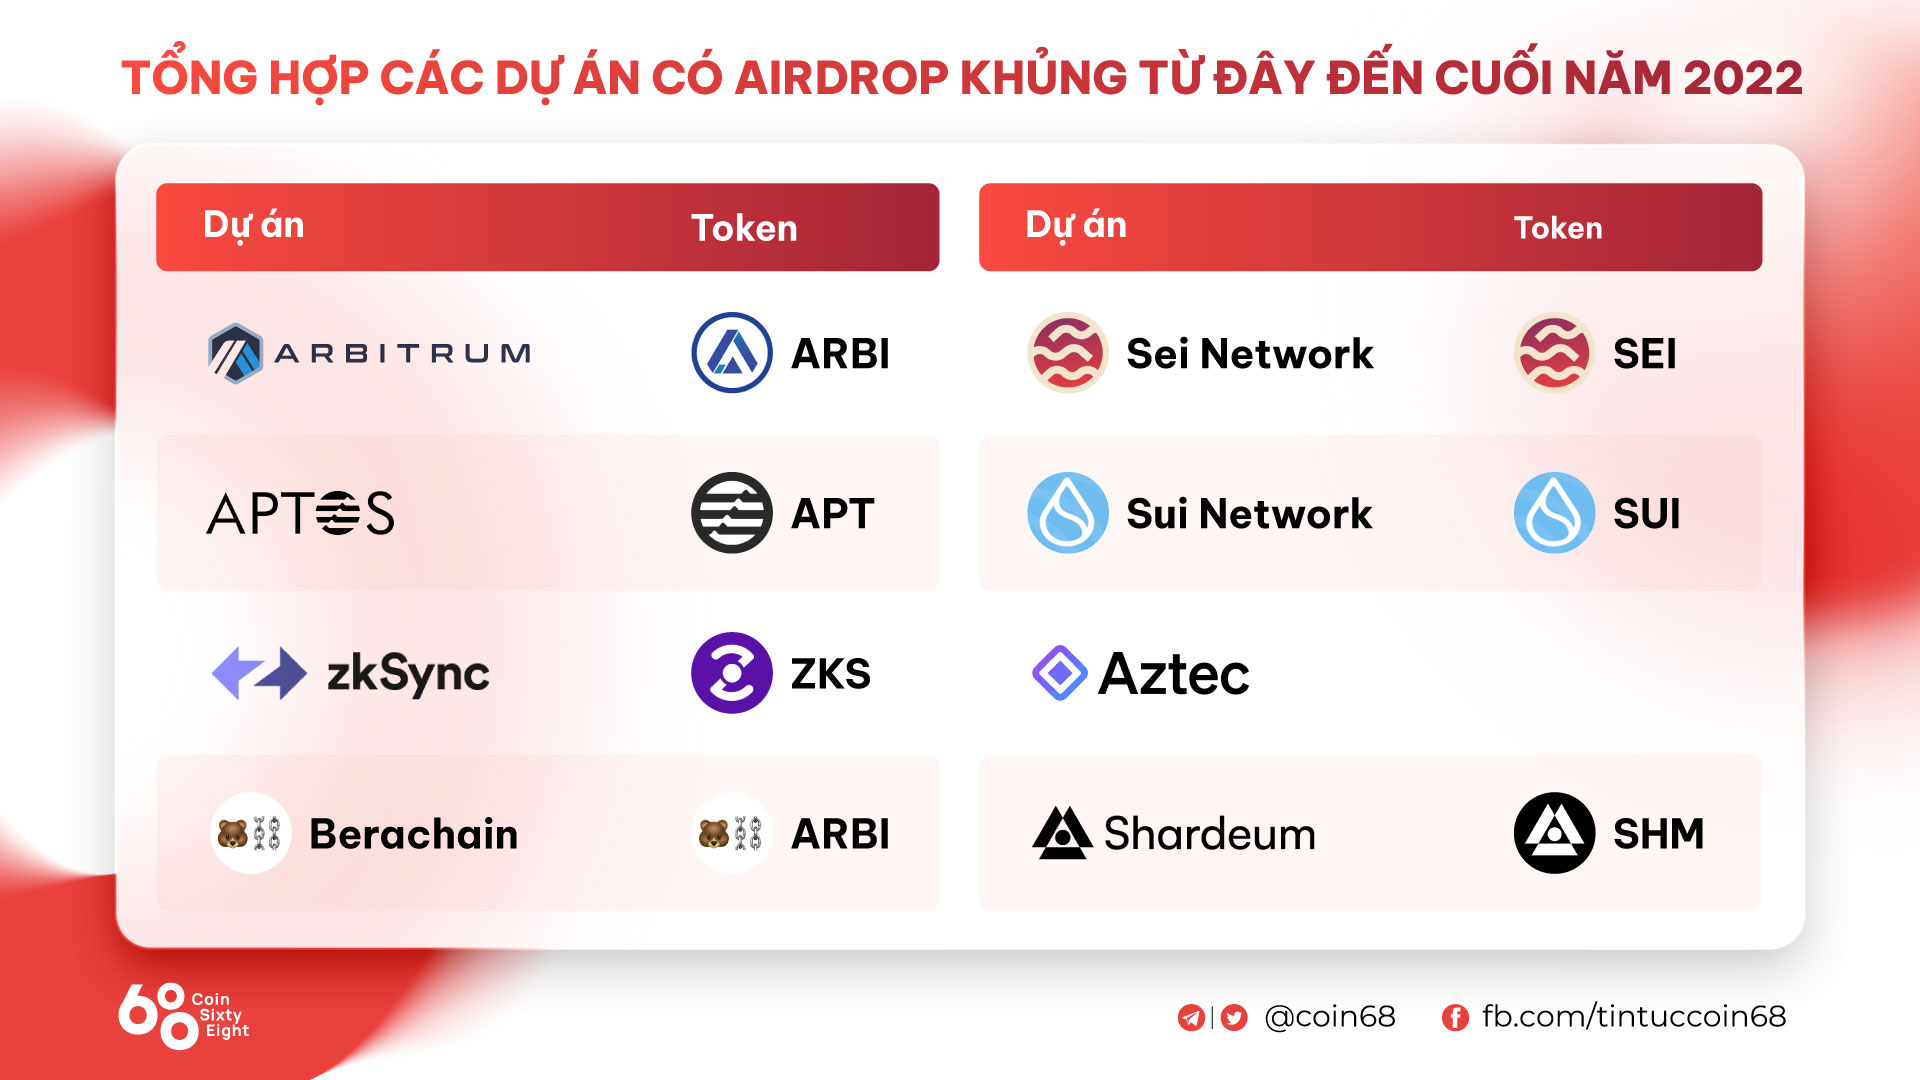 Summary of upcoming Airdrop projects from now to the end of 2022